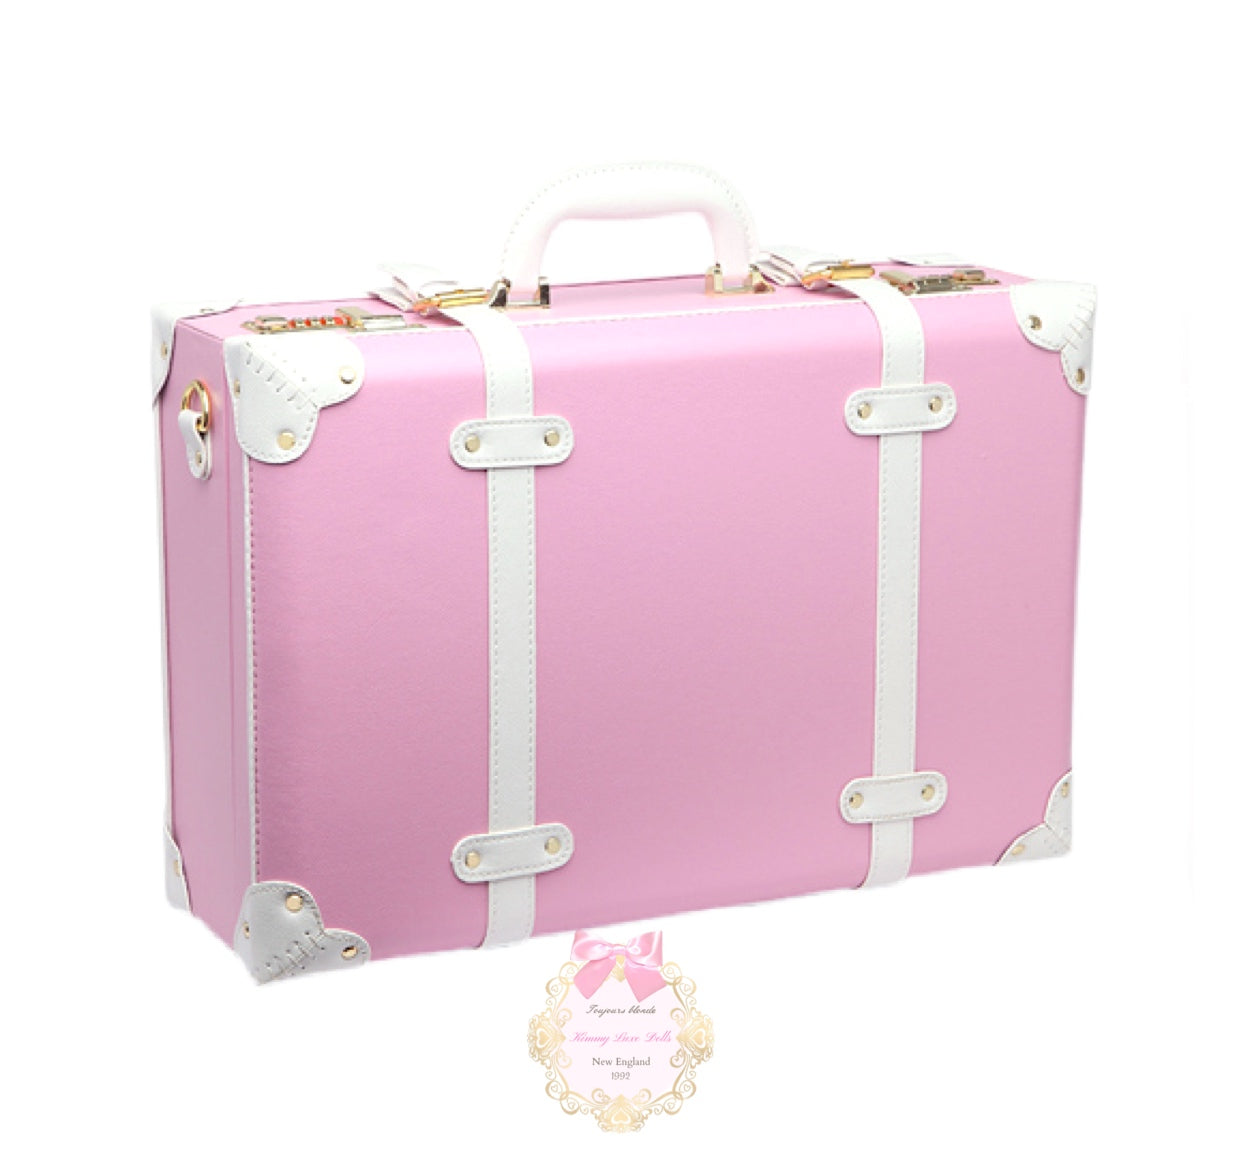 Luggage Trunk 18” (color options)